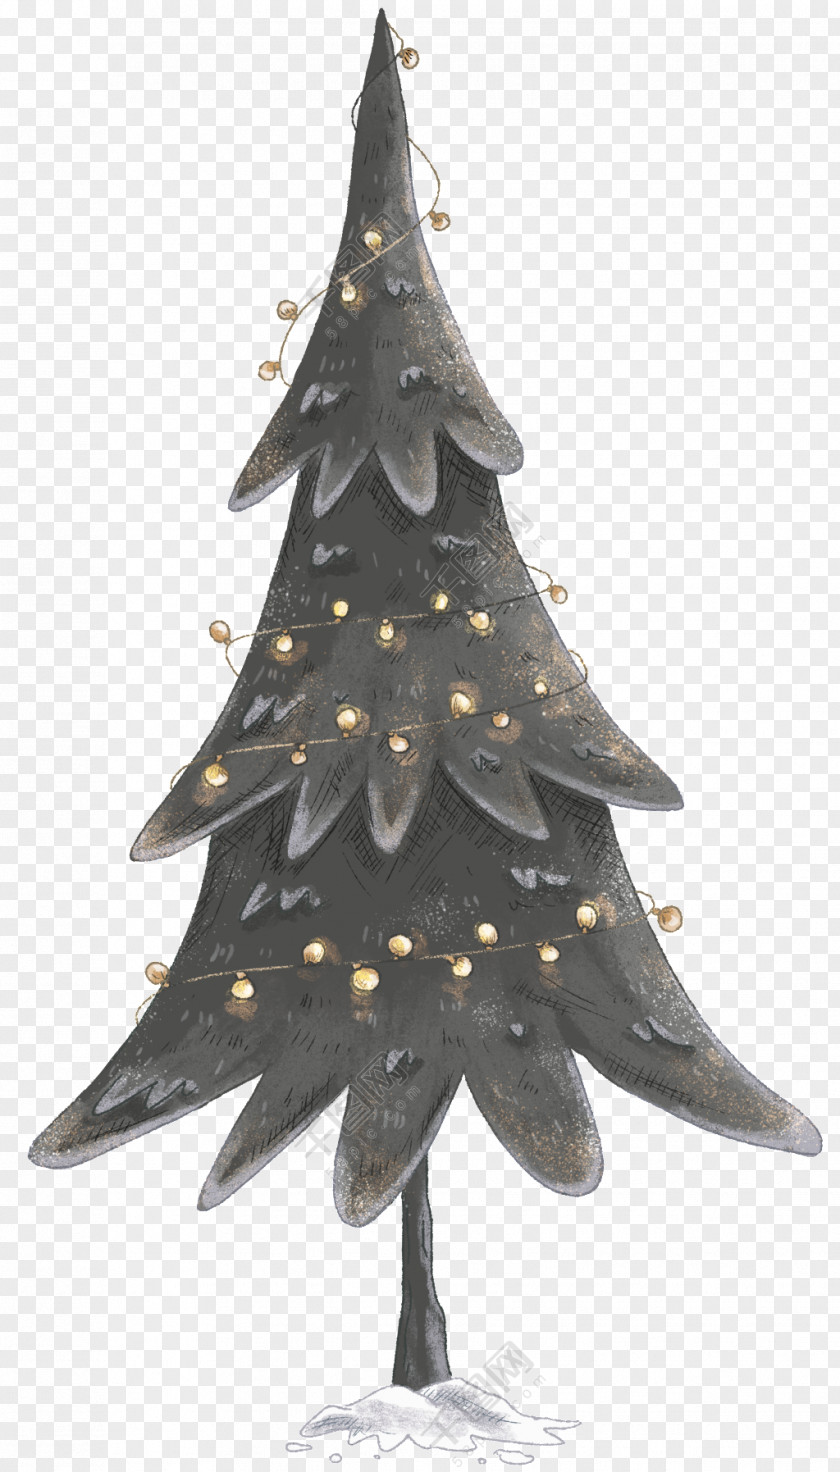 Ornate Christmas Tree Day Clip Art Image PNG